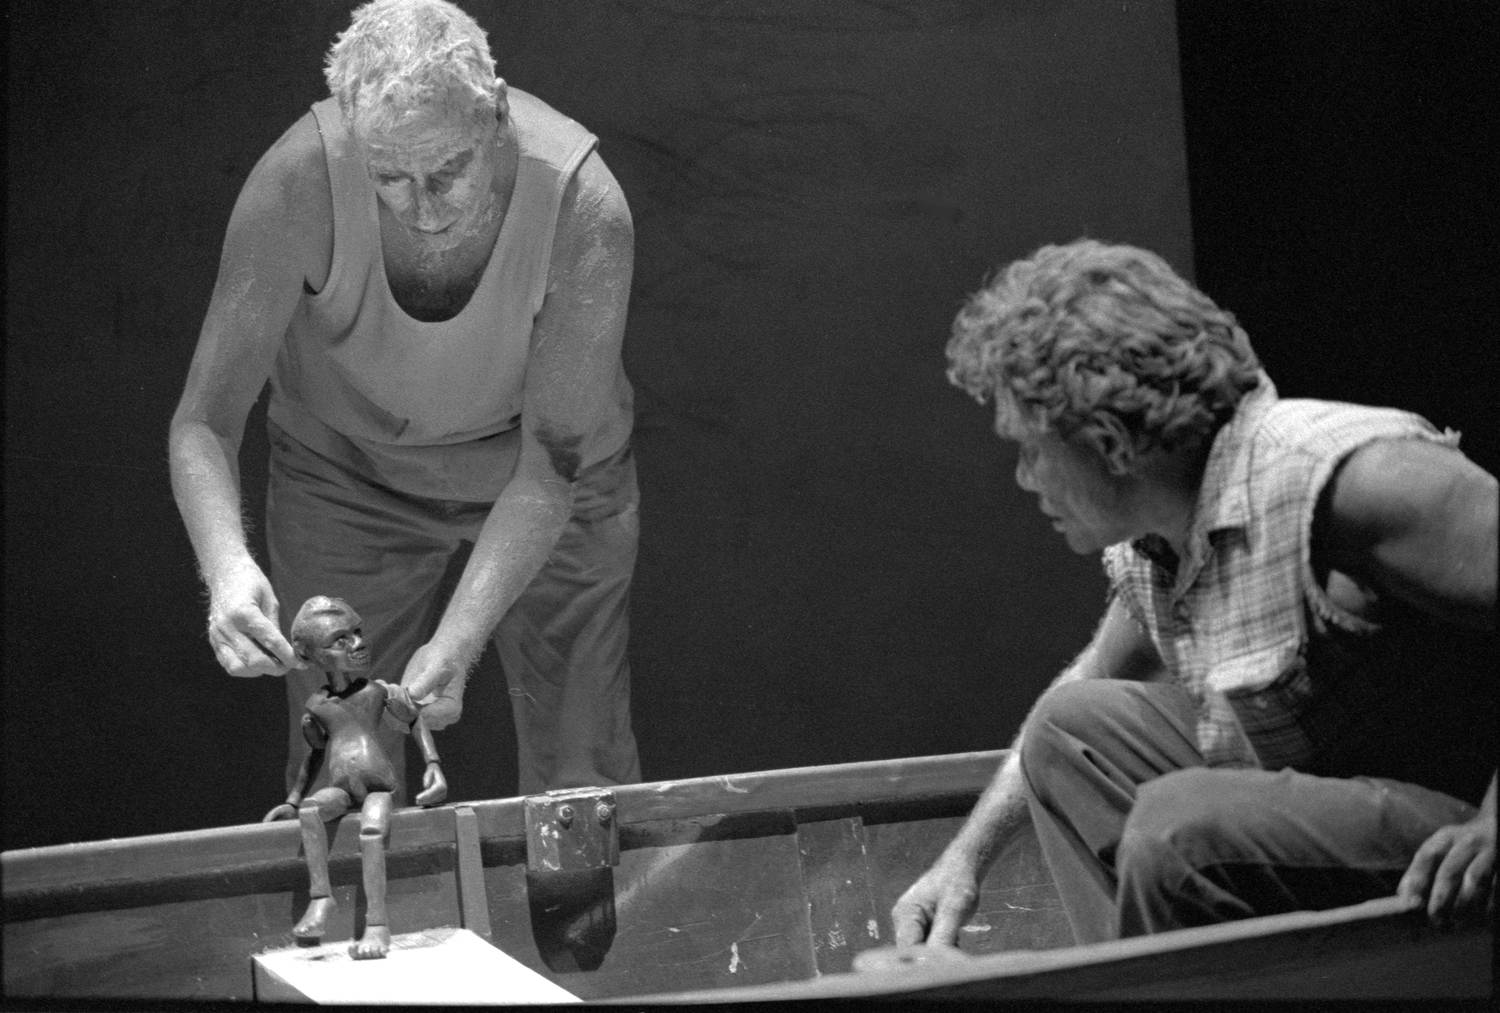 Lift Em Up Socks Handspan Theatre Puppeteer operating boy puppet conversing with Aboriginal man in dinghy. black and white